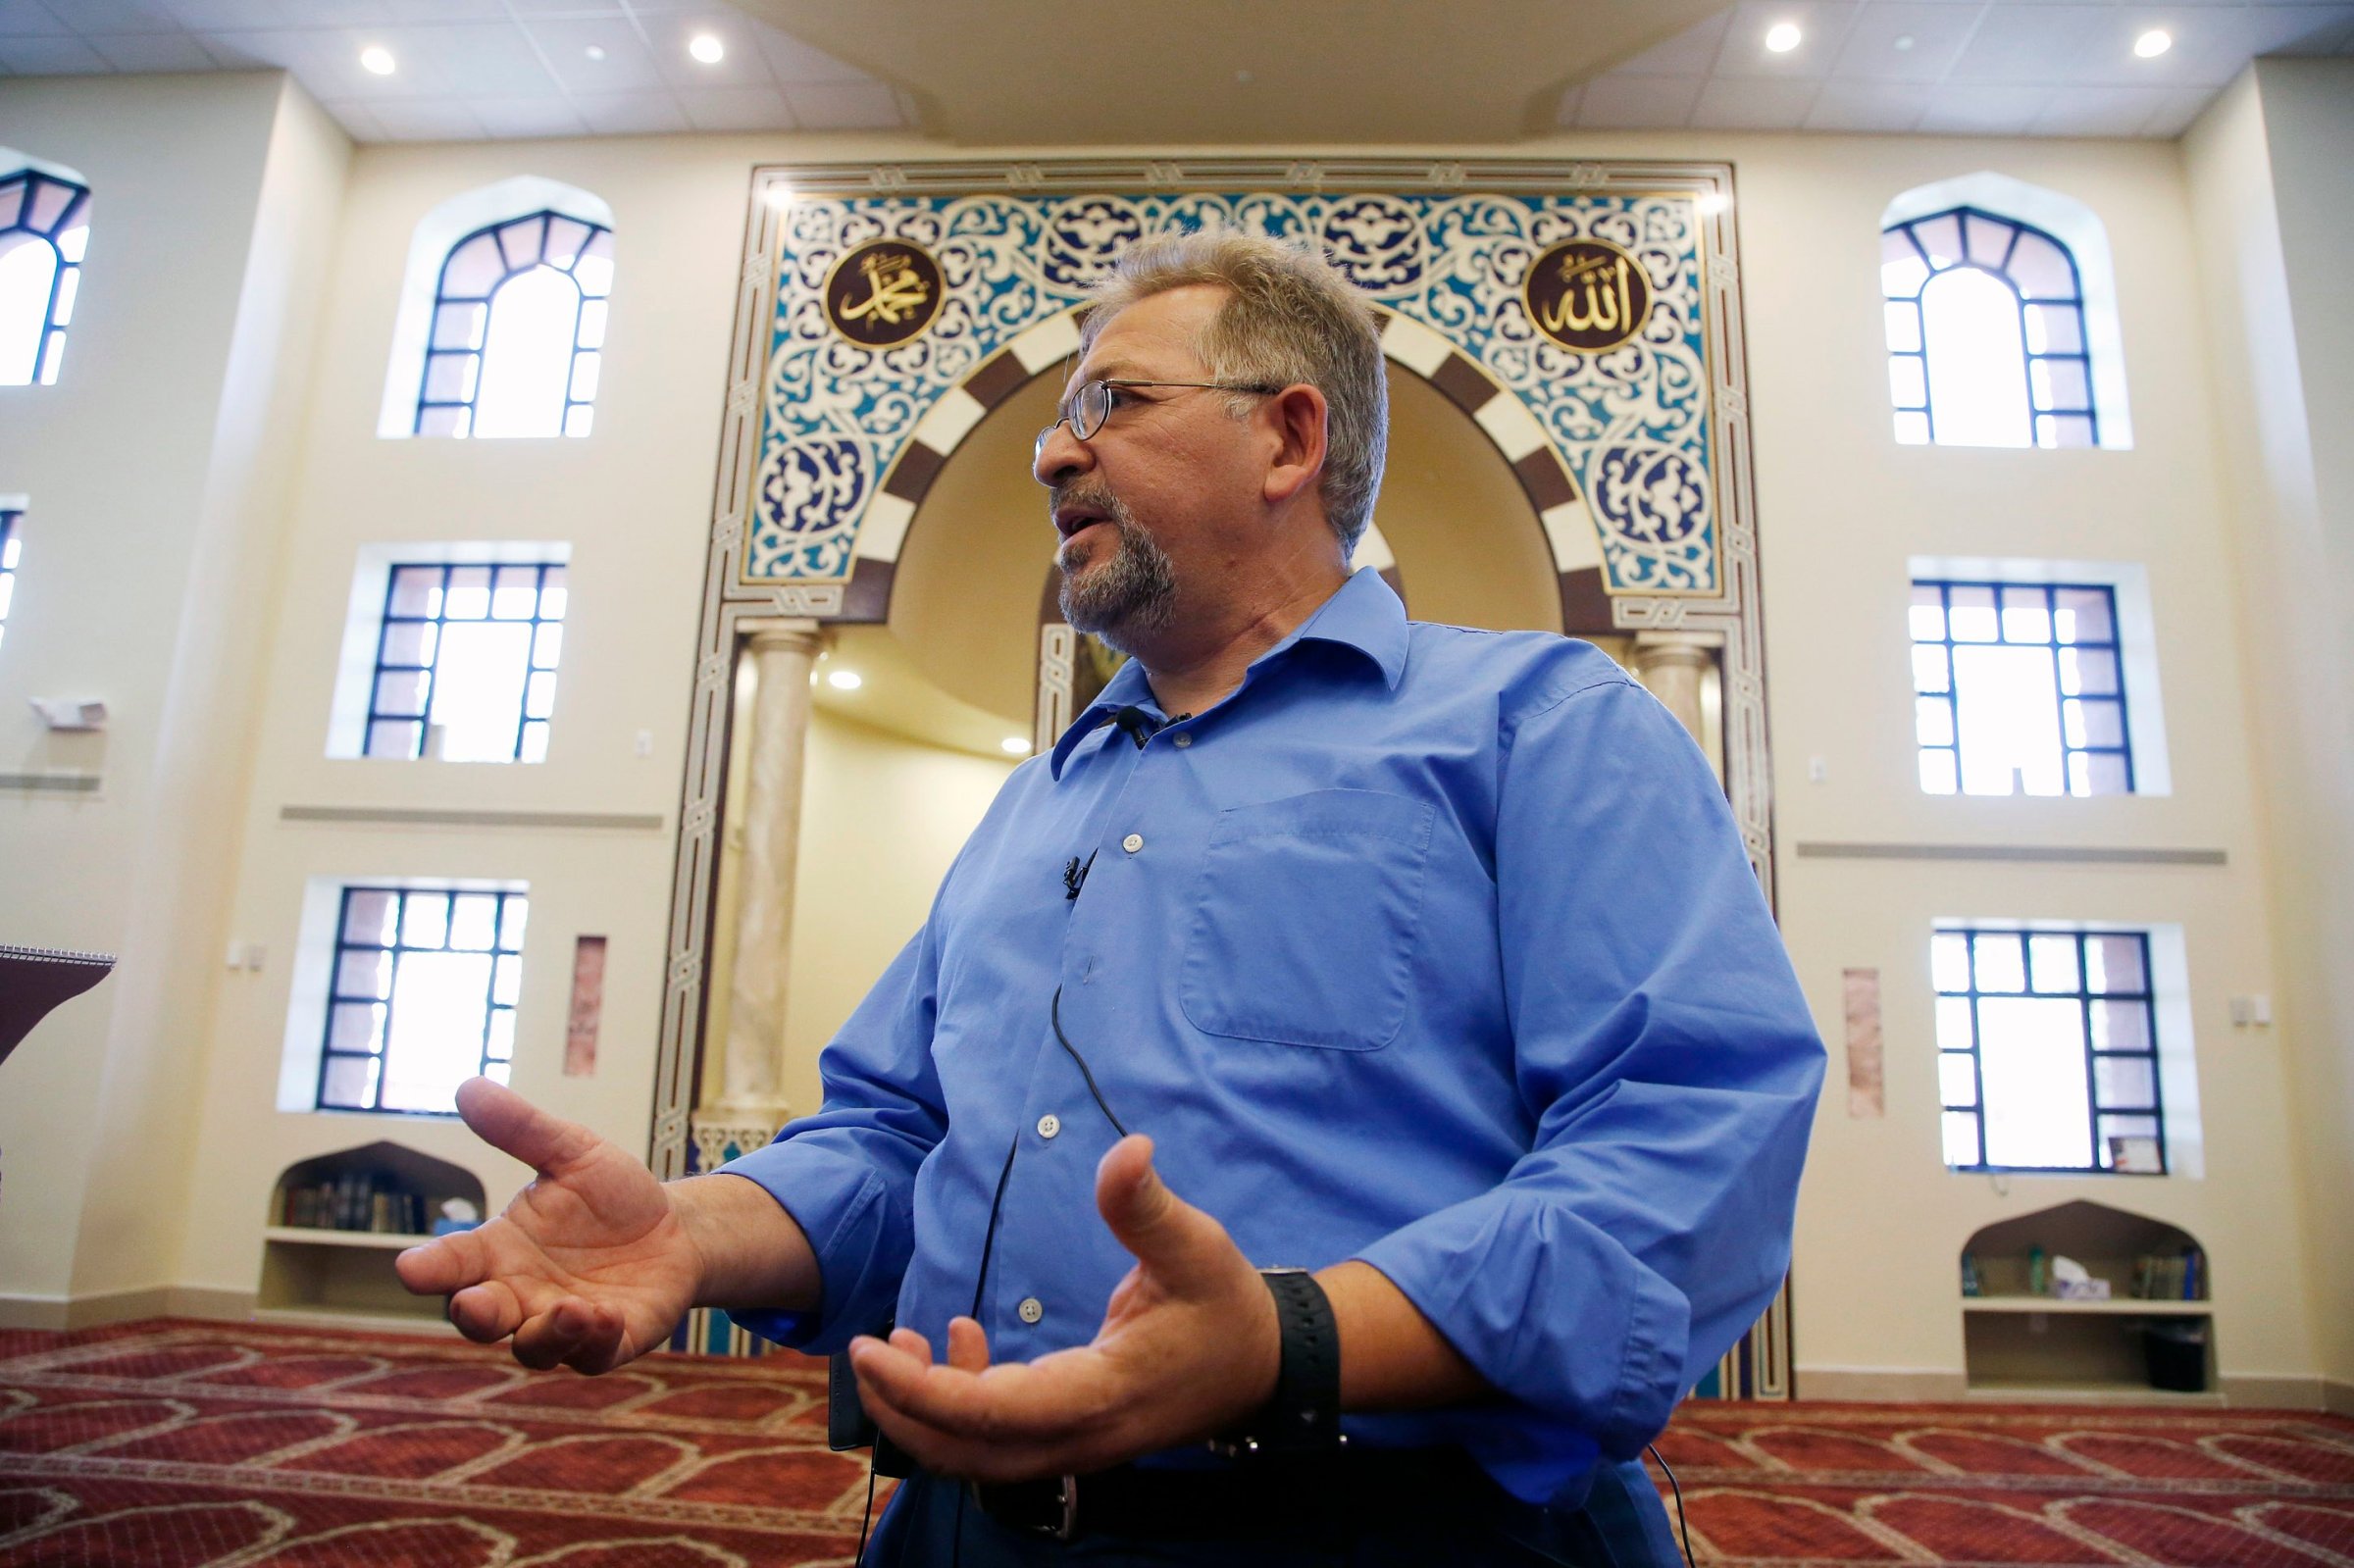 Usama Shami, the president of the Islamic Community Center of Phoenix, speaks at the mosque on May 4, 2015, in Phoenix.